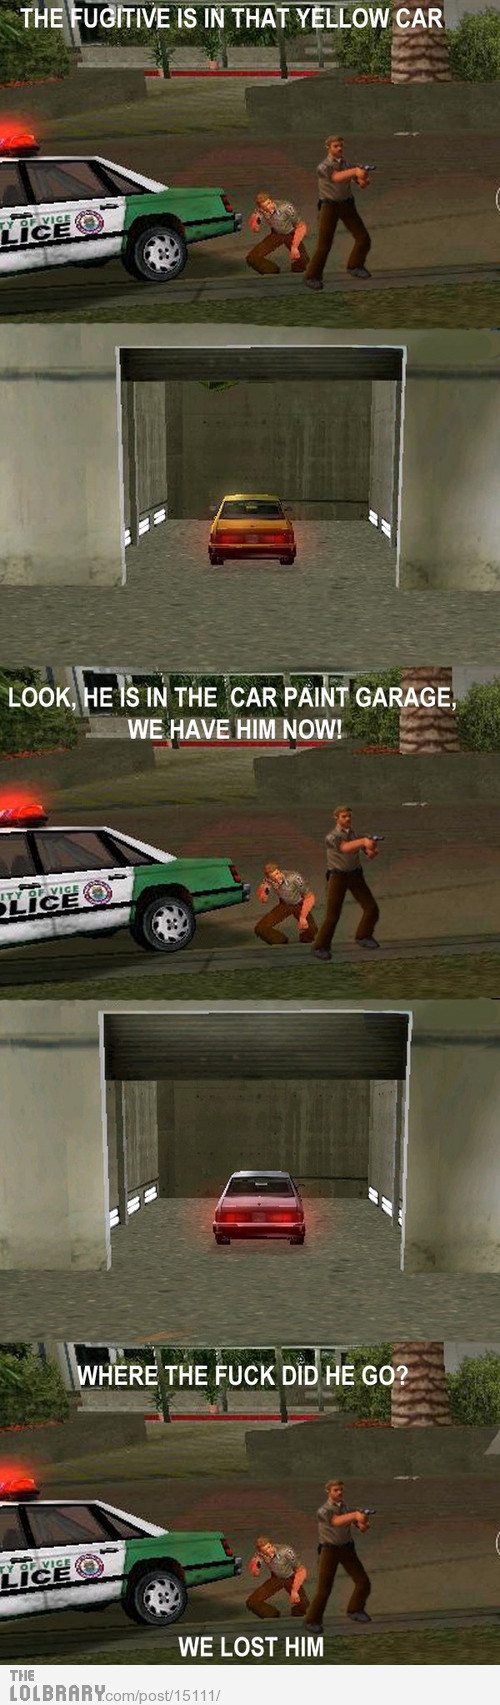 vice city logic - The Fugitive Is In That Yellow Car Liceo Look, He Is In The Car Paint Garage, We Have Him Now! Where The Fuck Did He Go? We Lost Him The Lolbrary.compost15111